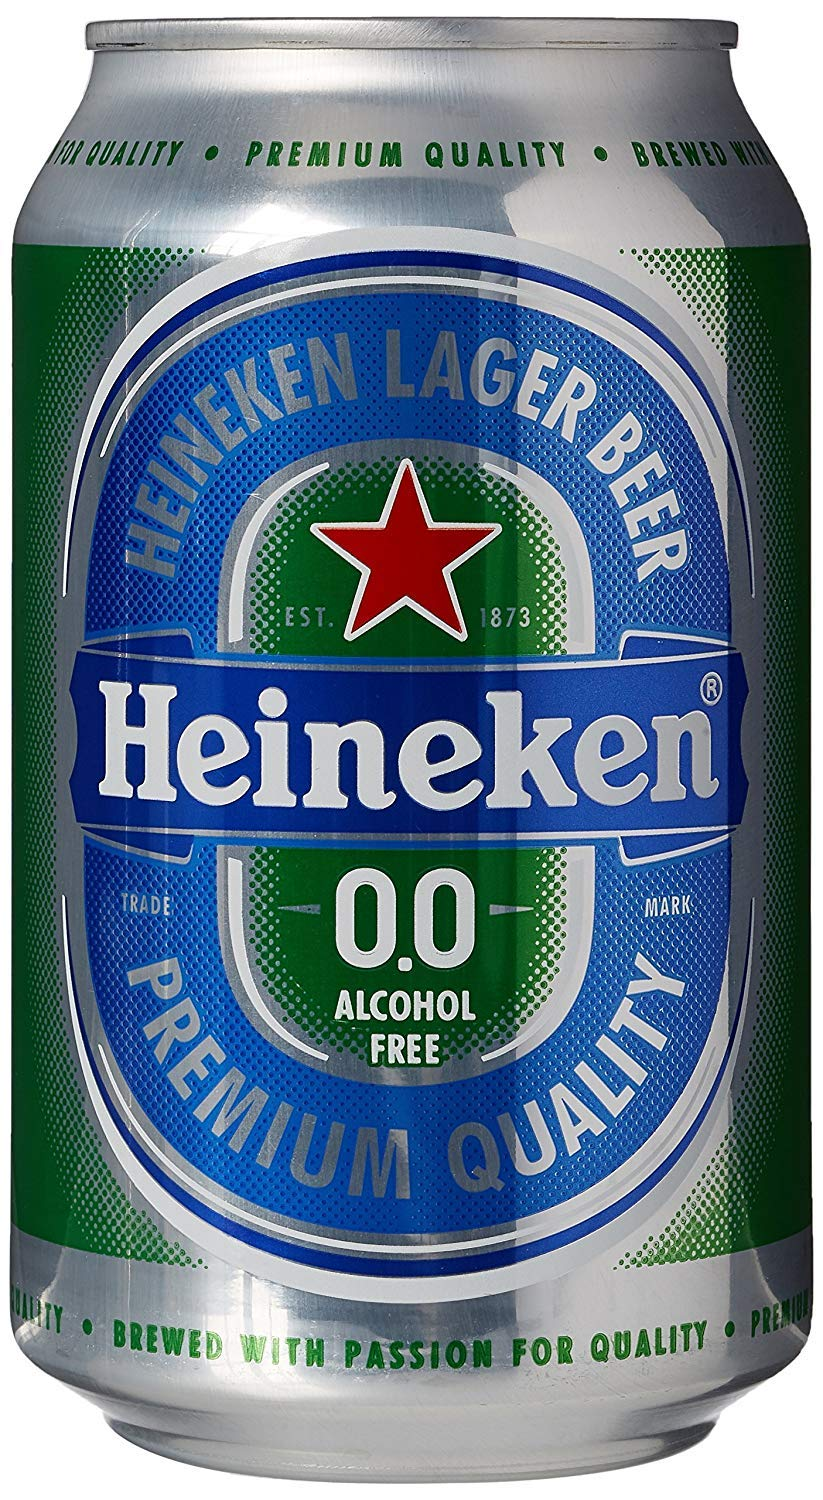 Heineken 0.0% Non-Alcohol, Alcohol Free Beer, 11.2 Fl Oz Can